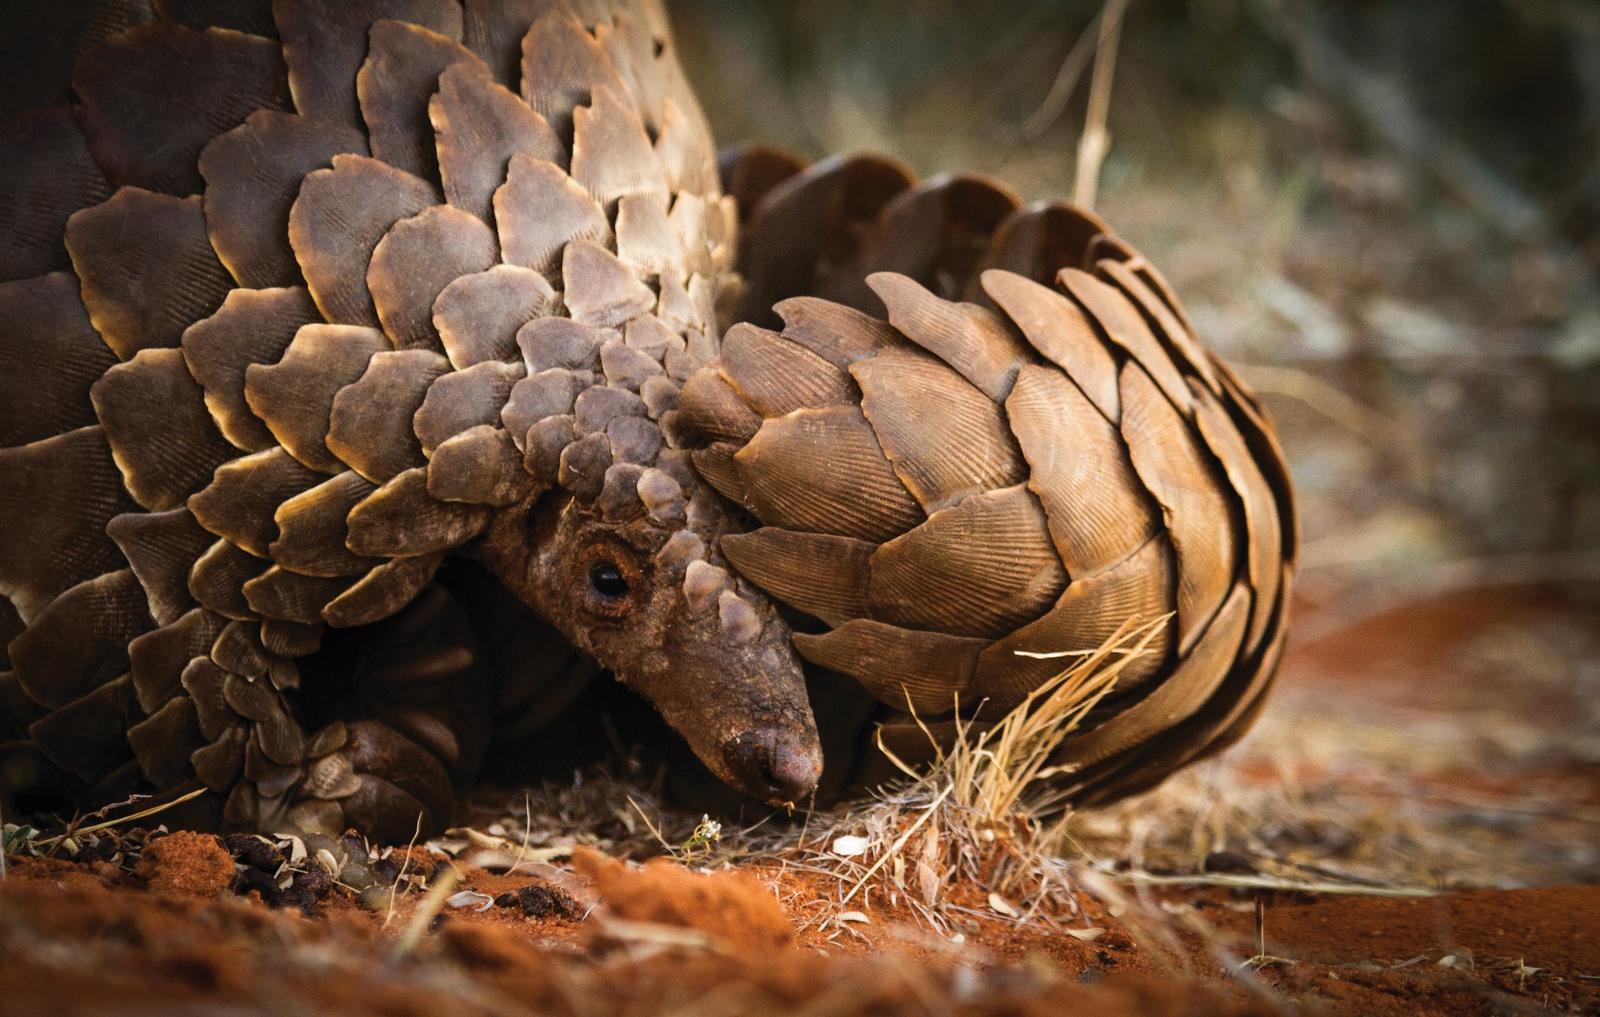 Protecting pangolins from wildlife crime | Magazine Articles | WWF1600 x 1017